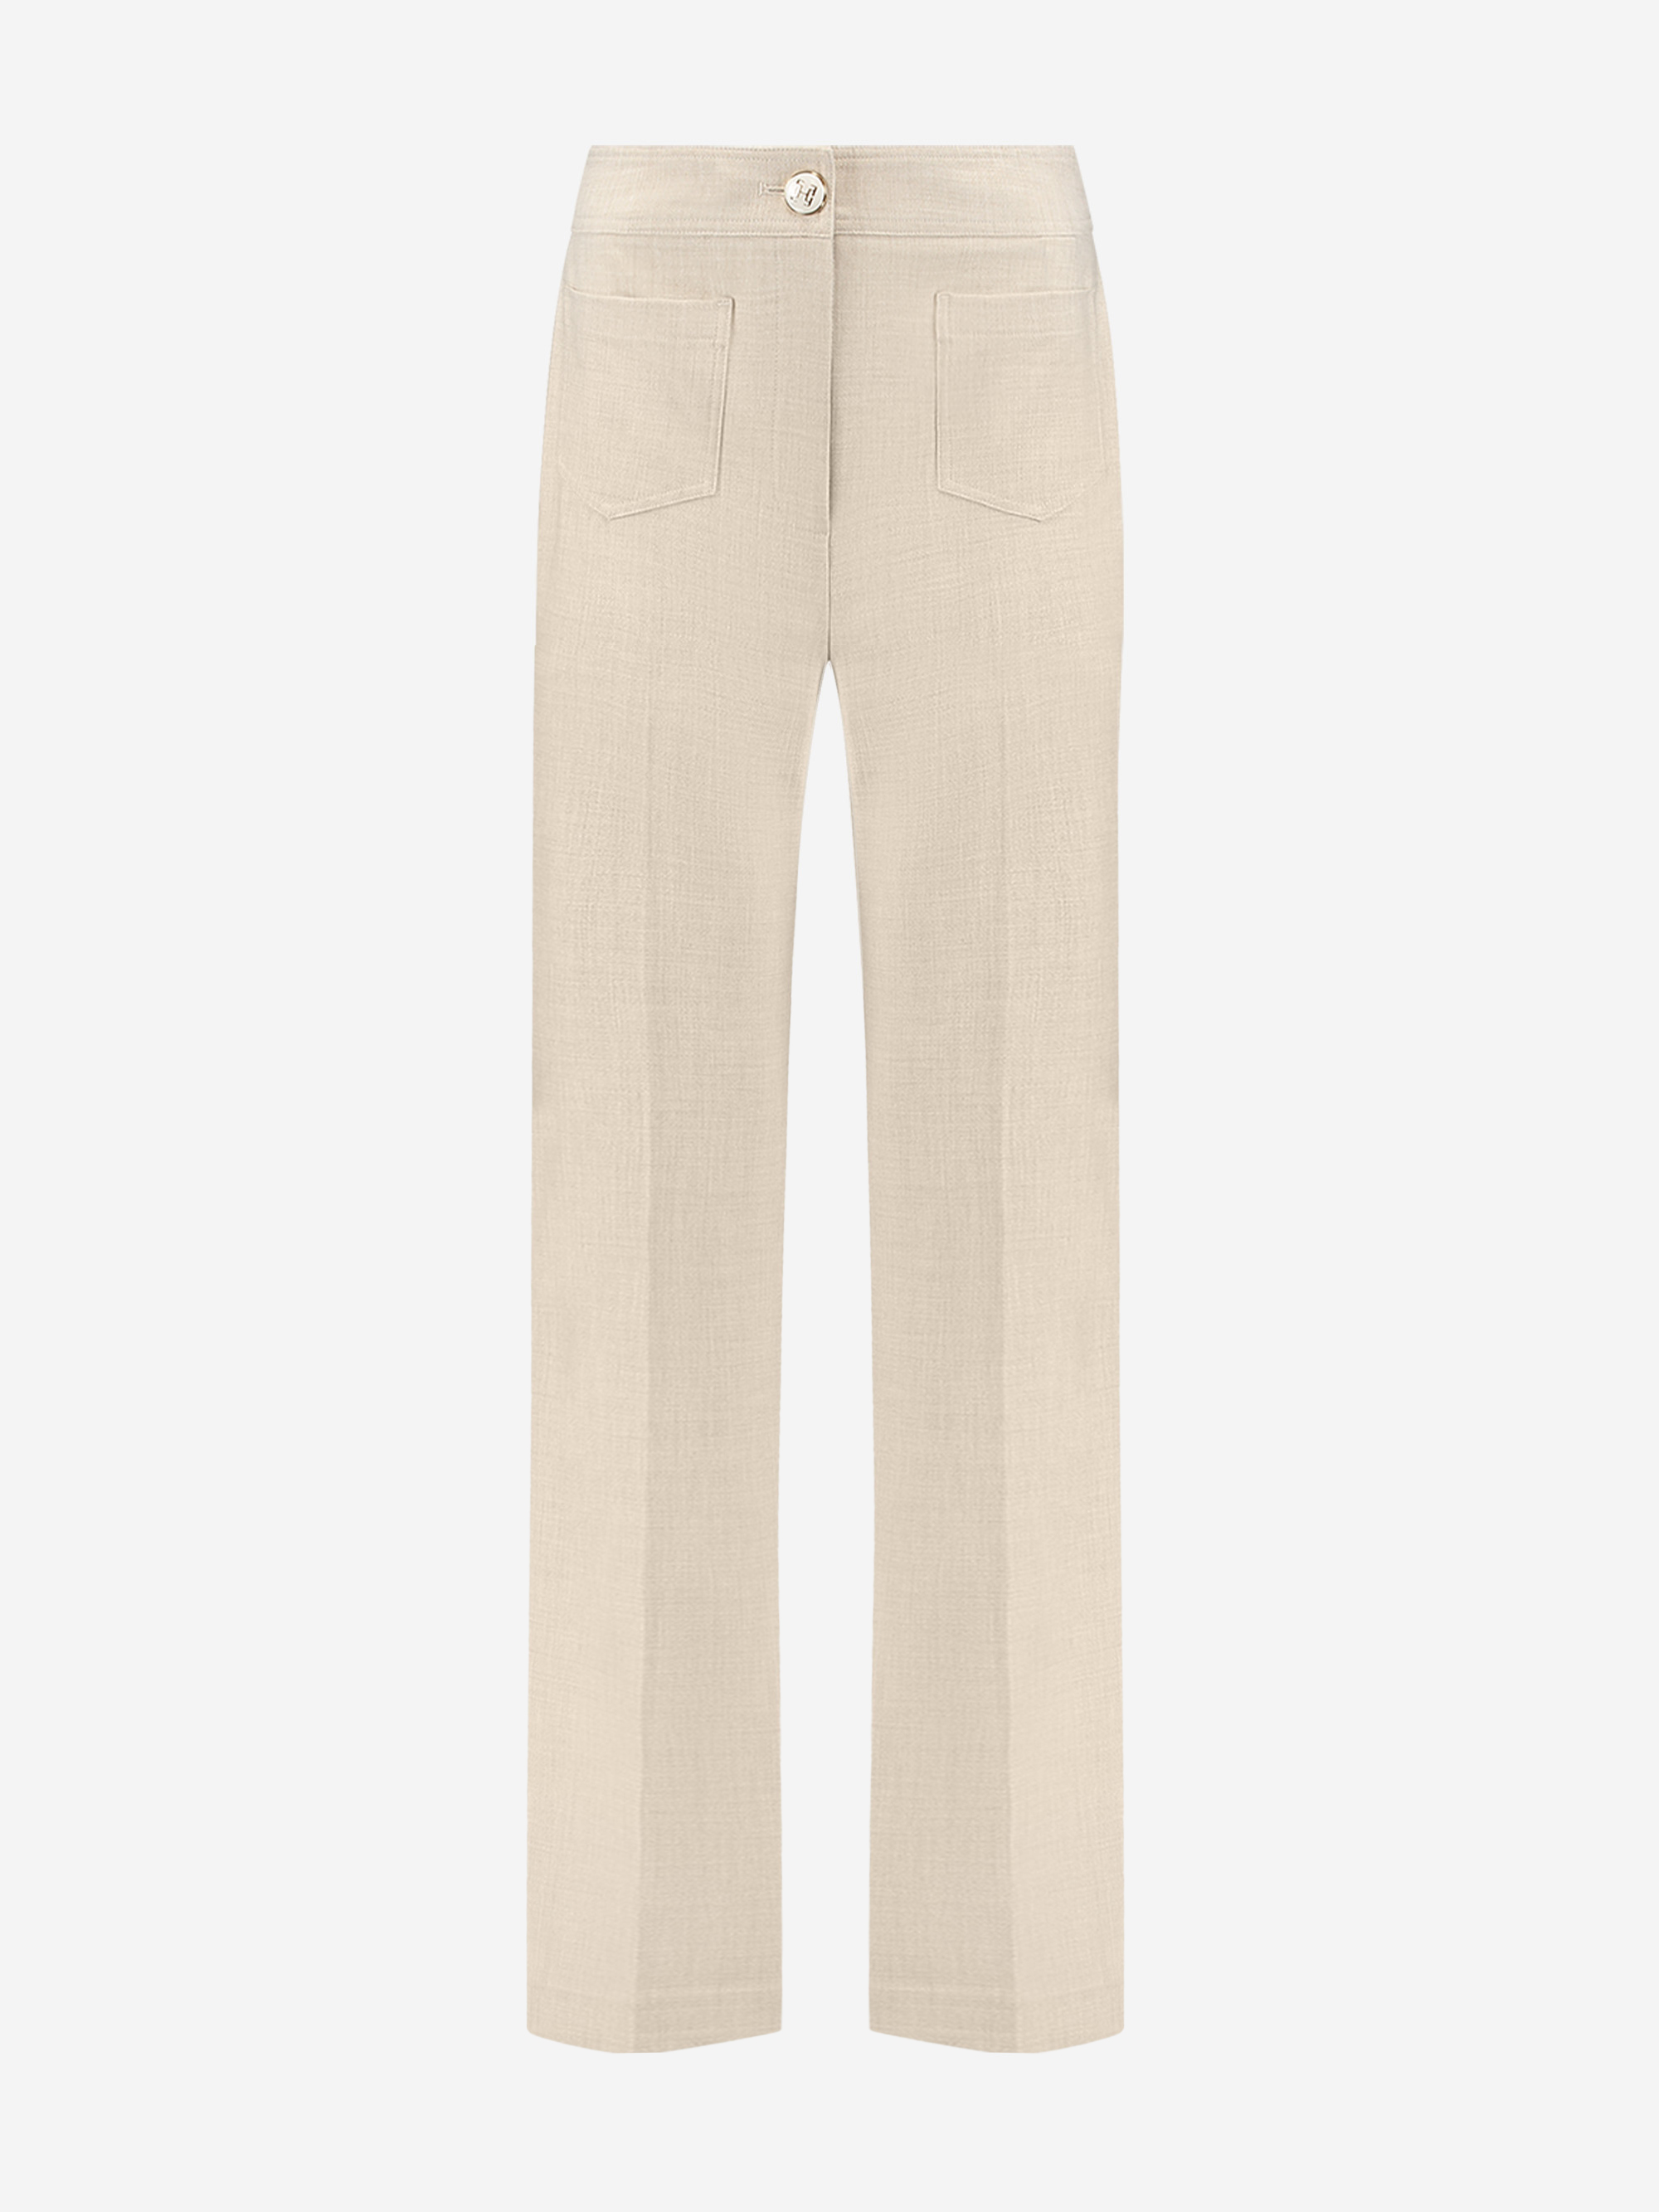 Straight fit pants